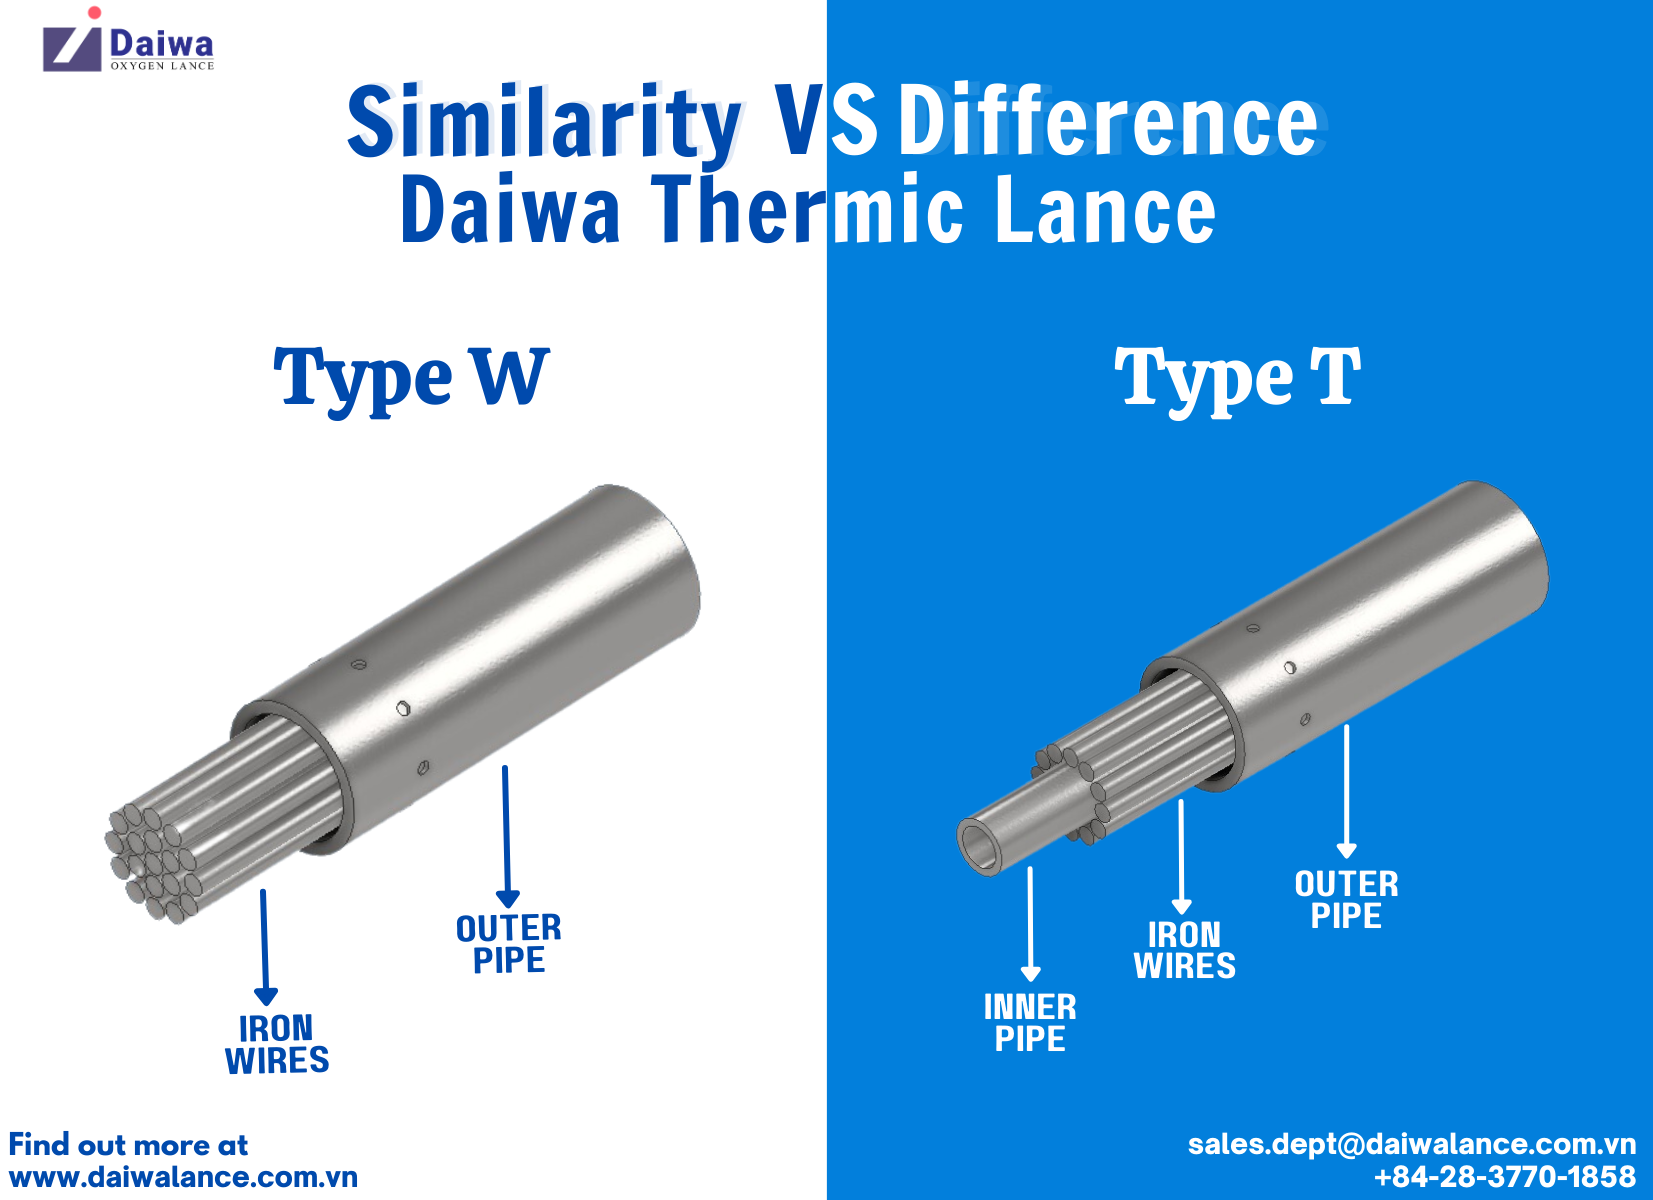 Type W and Type T of Thermic Lance: Similarity and Difference